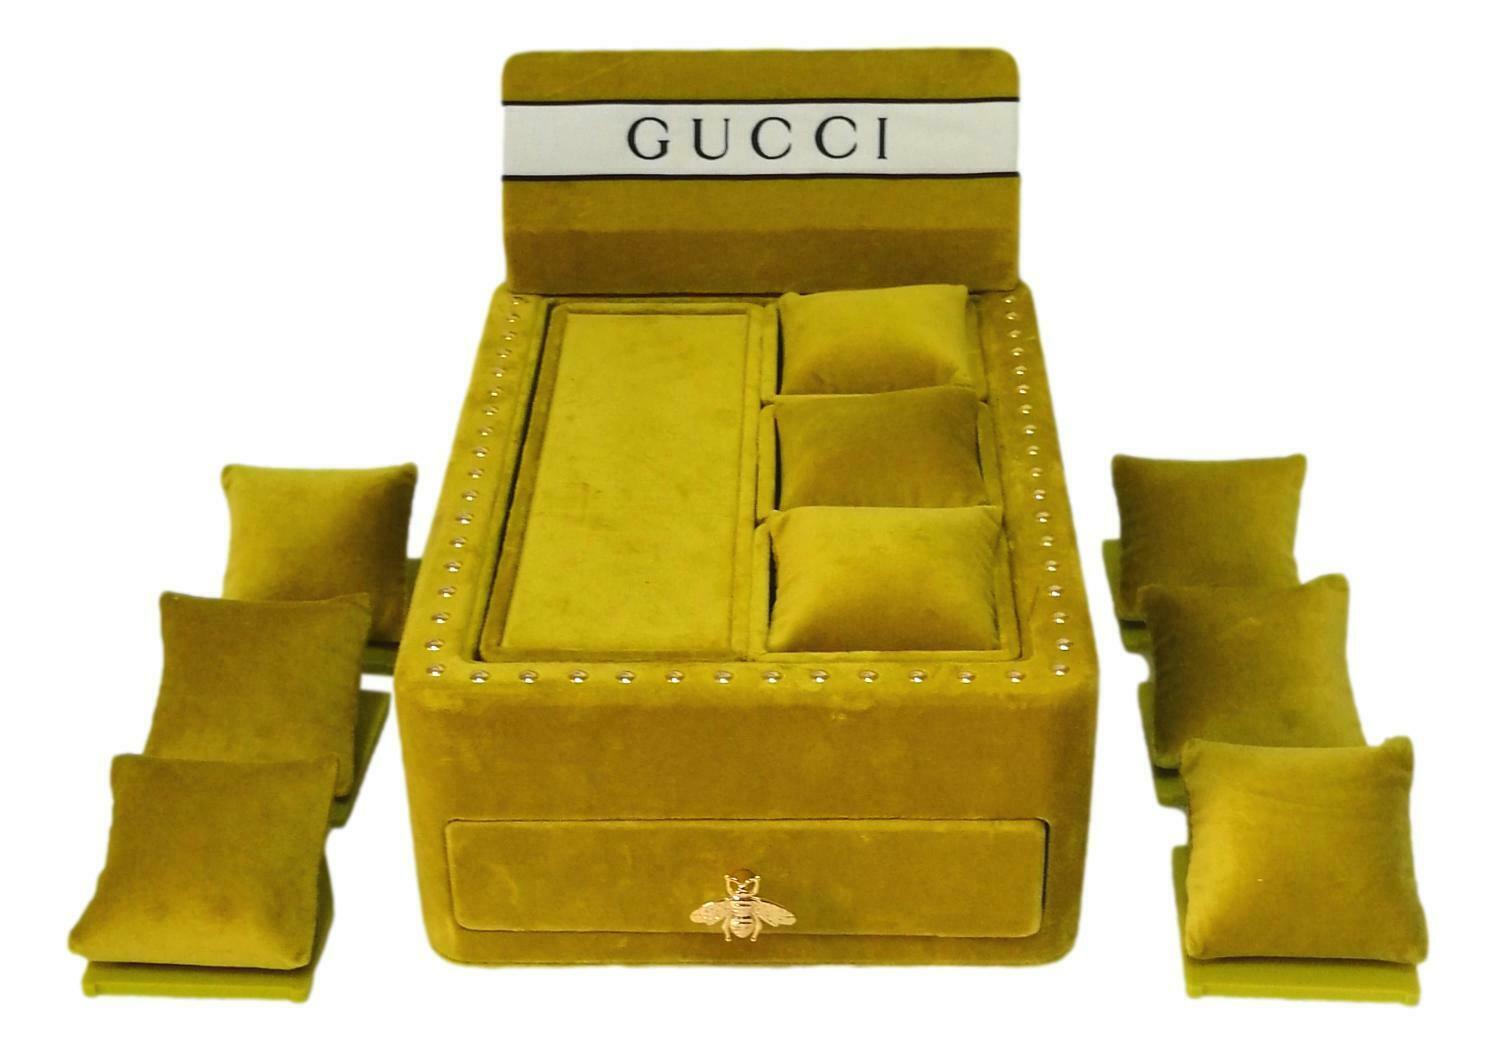 Italian Expositor Advertising Store Dealer for Watches and Jewelry Original Gucci Yellow